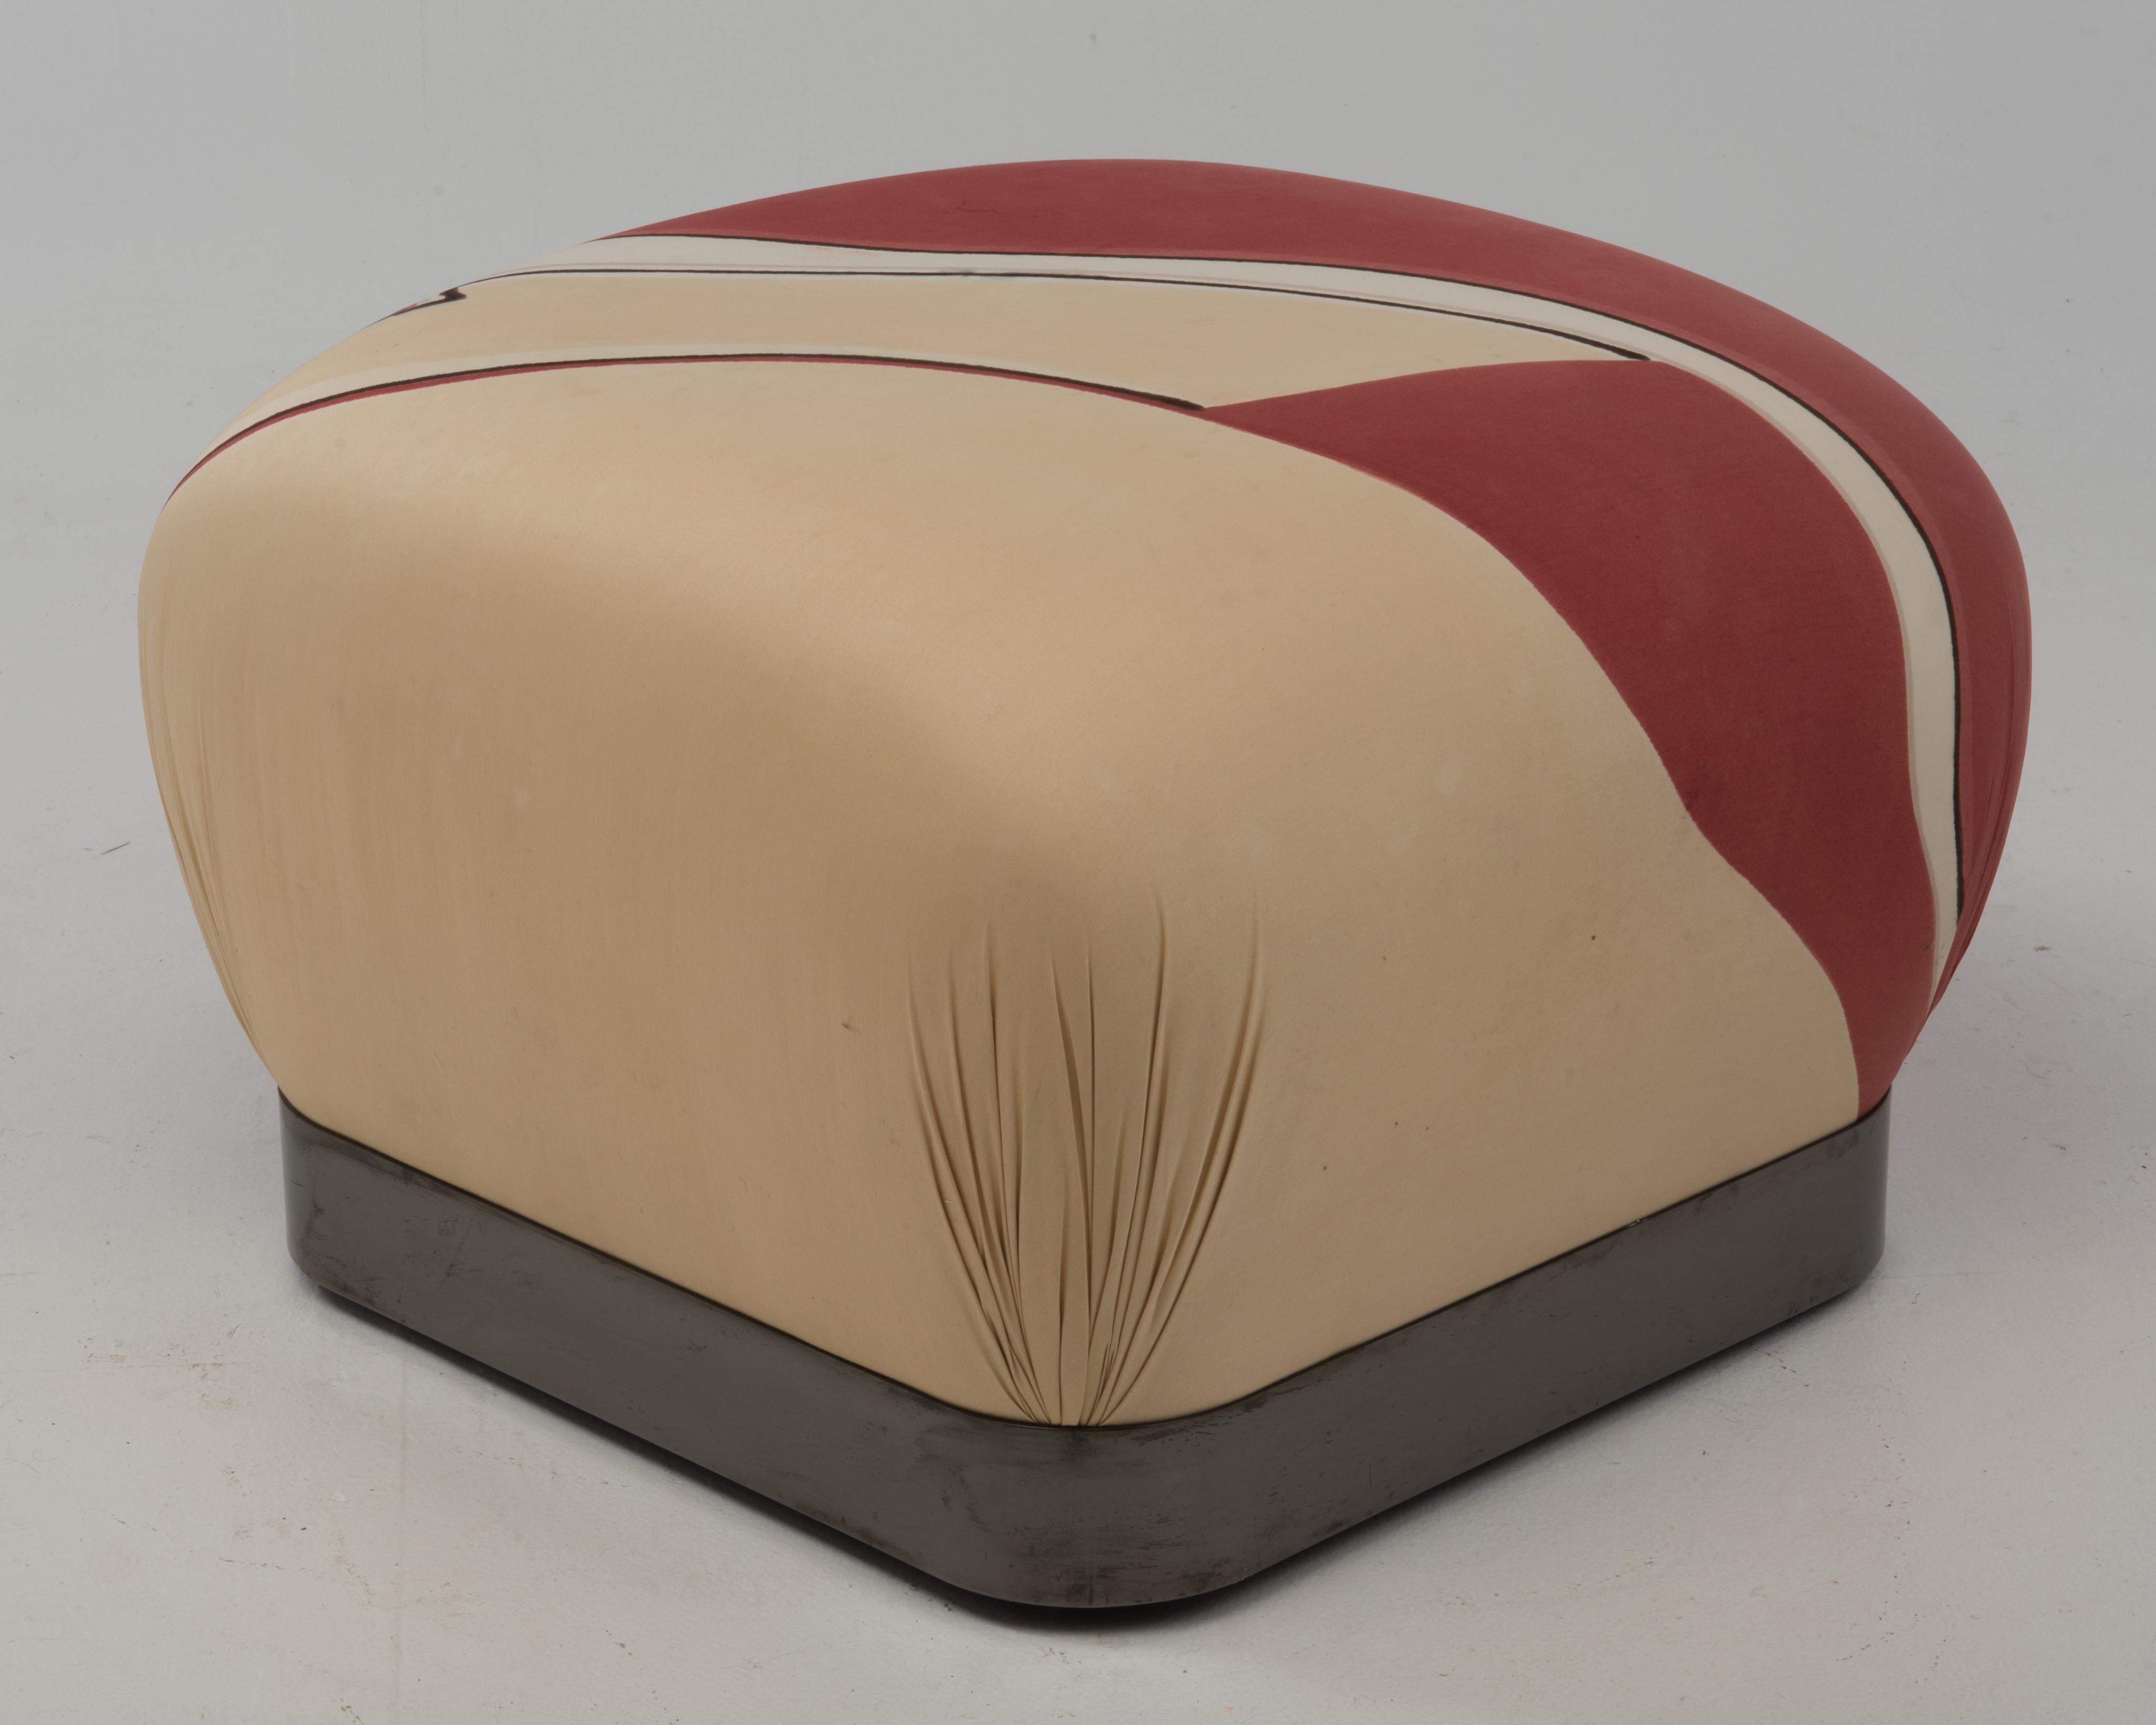 A vintage Karl Springer pouf ottoman in the original silk fabric. The ottoman is clean and shows very nicely. There is water staining to the top, the overhead photograph shows a few small areas where the colors have run. Measures: 24